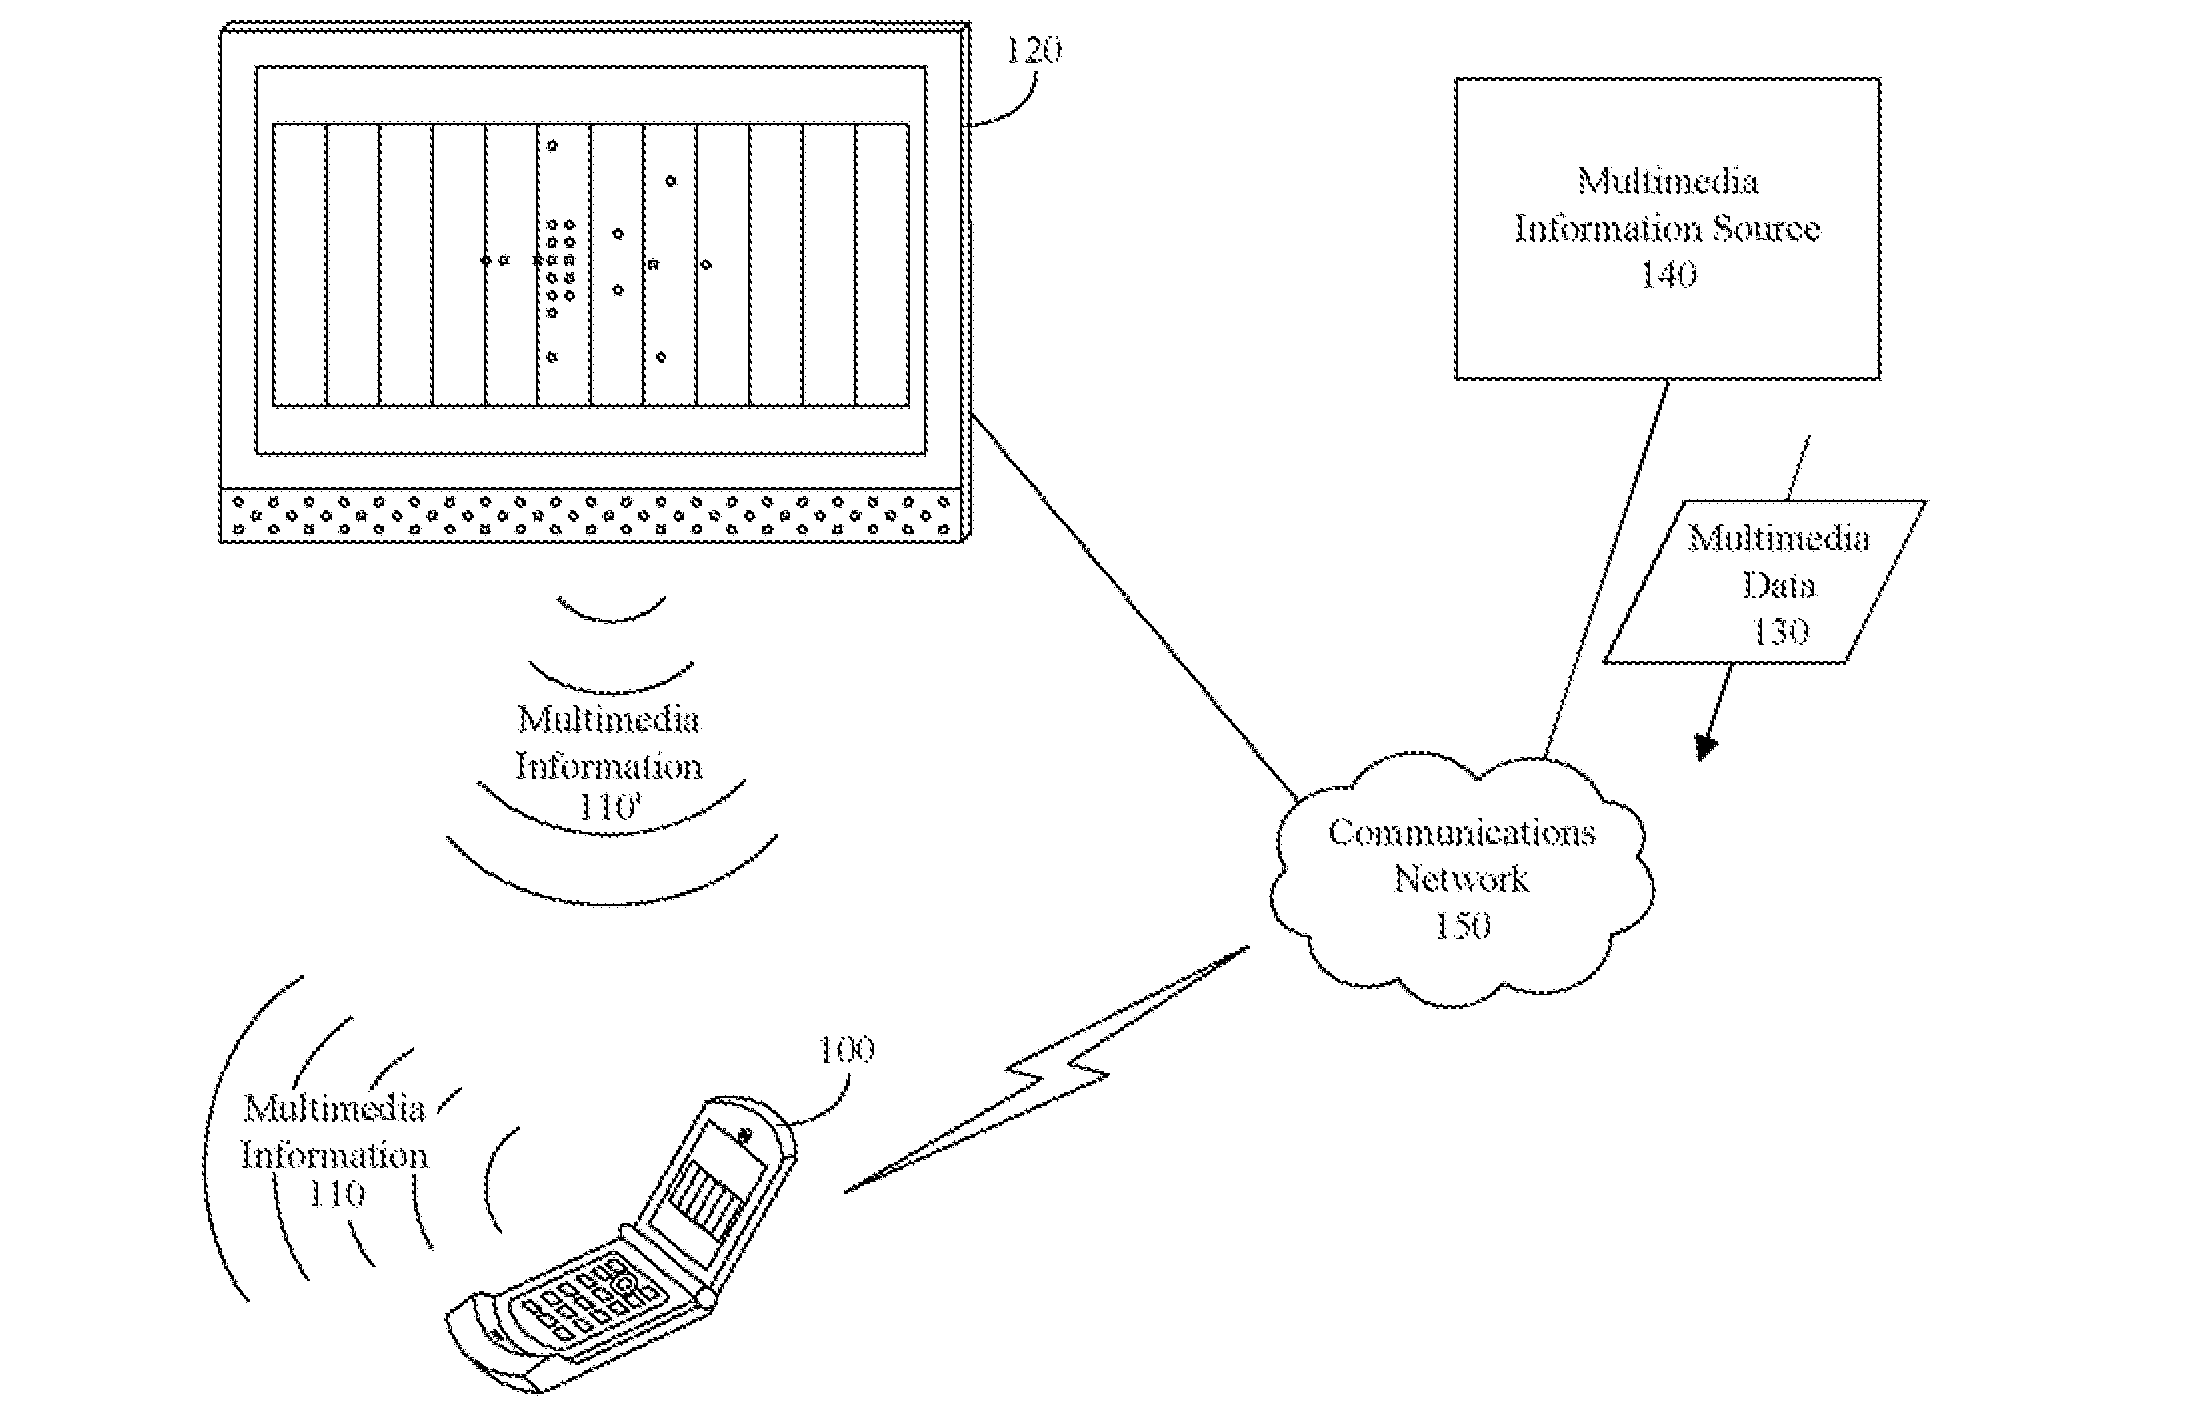 Avoidance of multimedia signal degradation in a communication device located proximate to another multimedia signal source